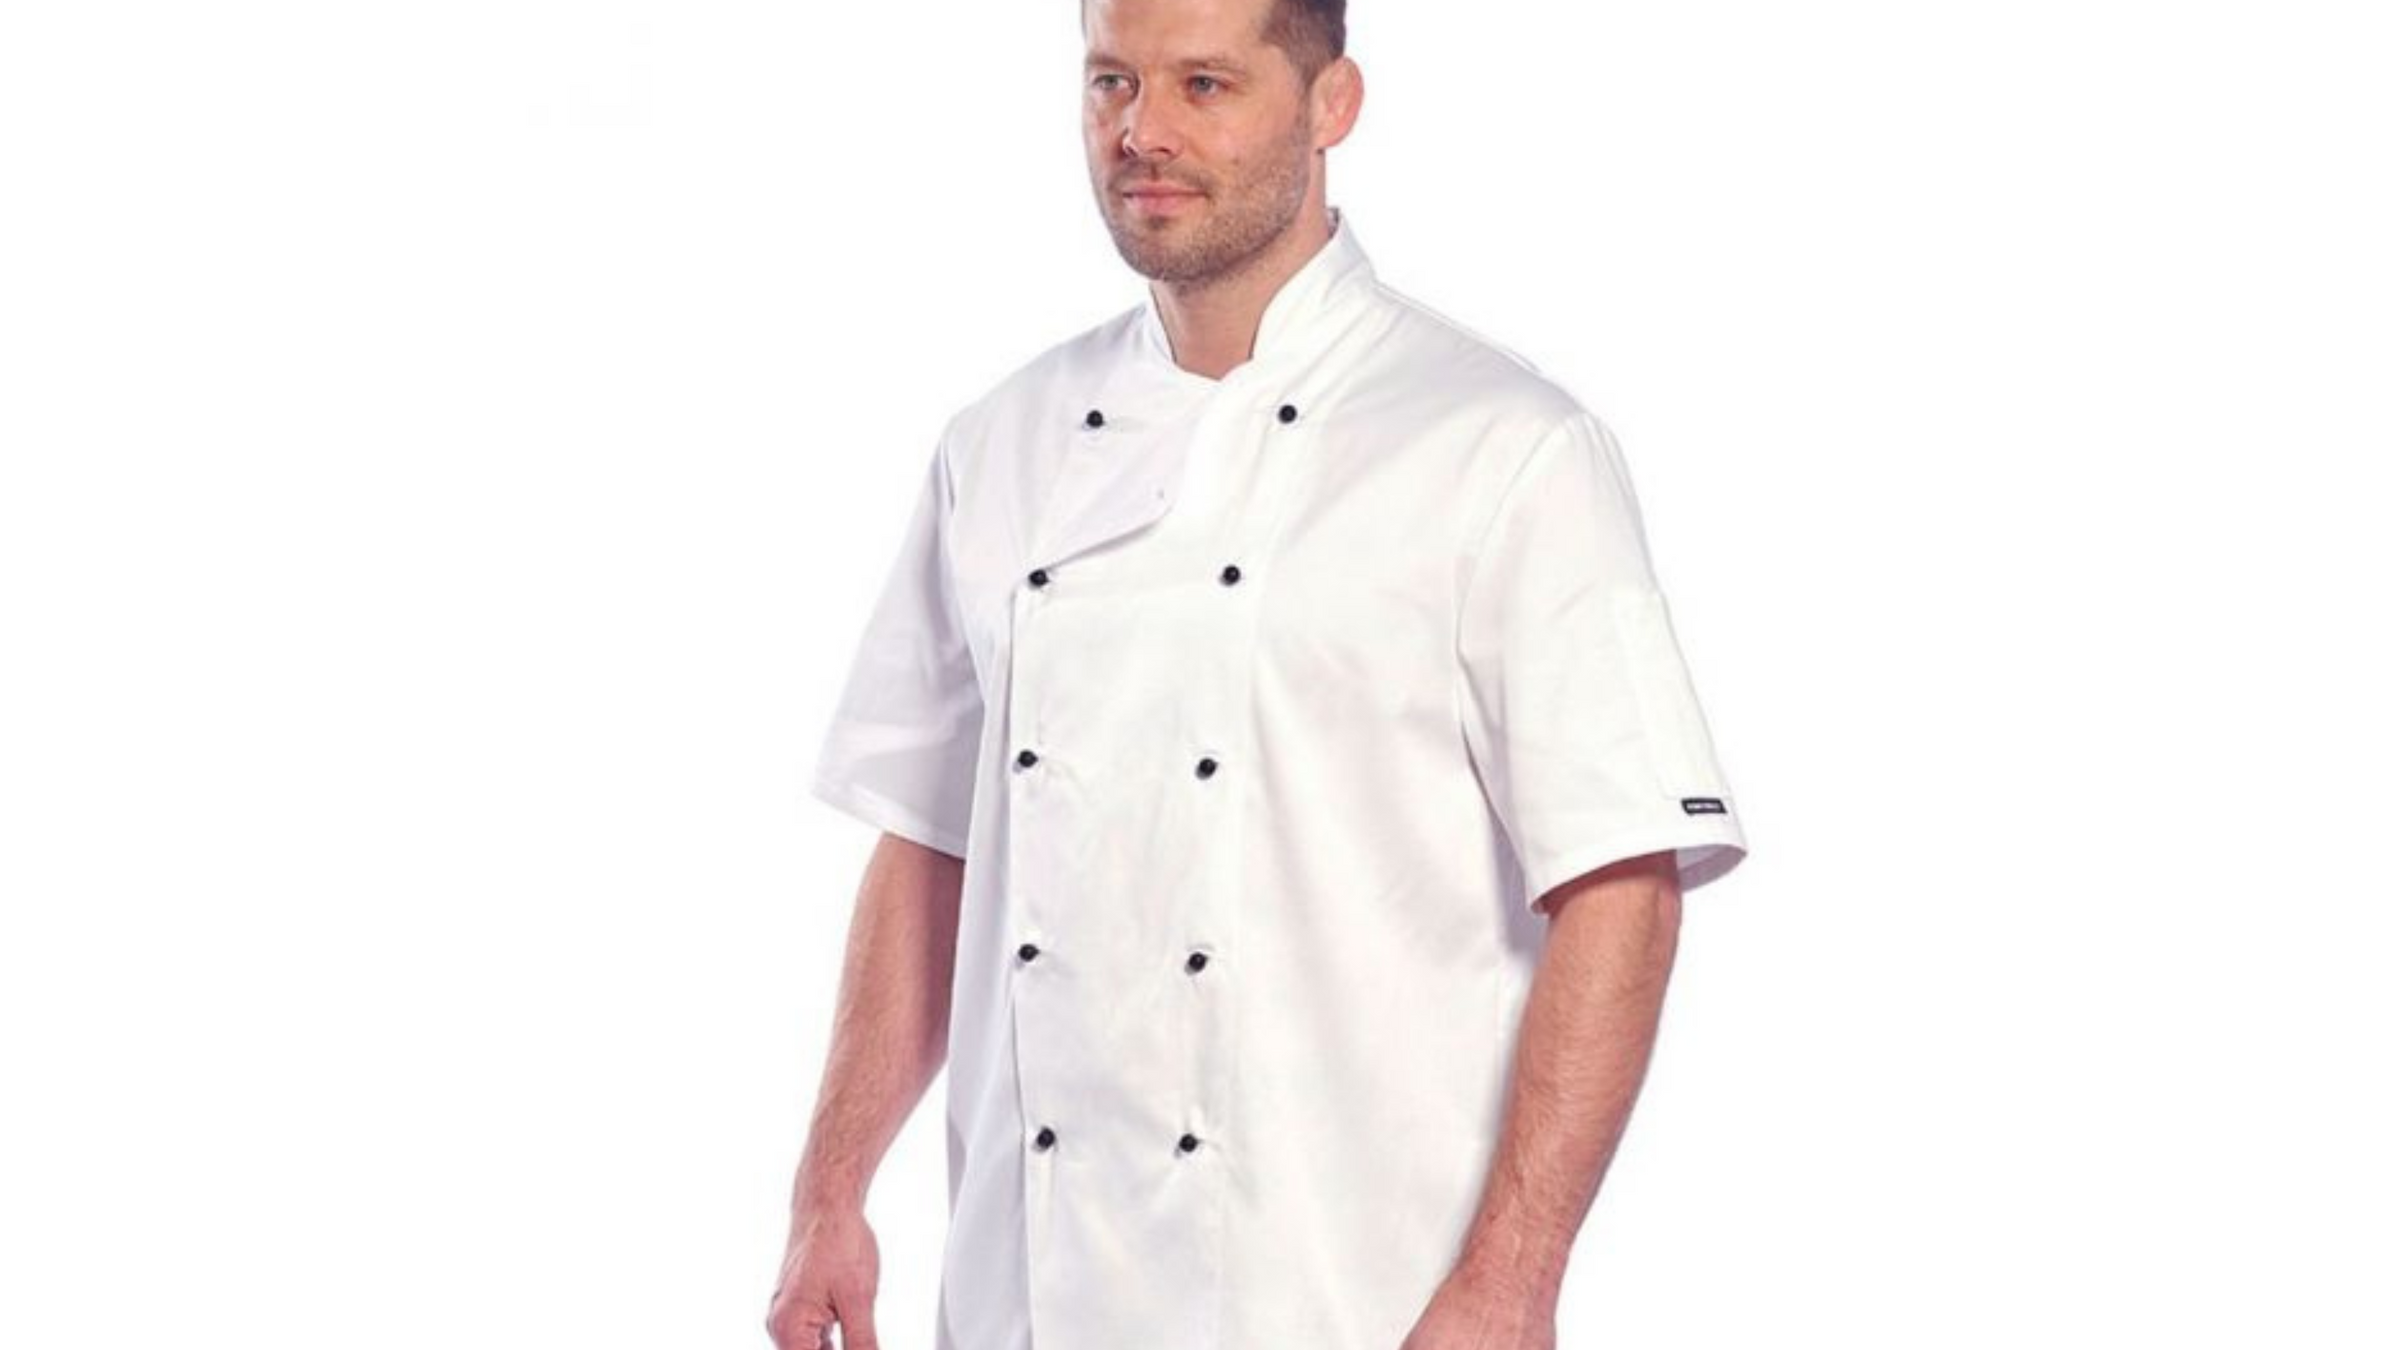 An image of Chef Coat being modelled